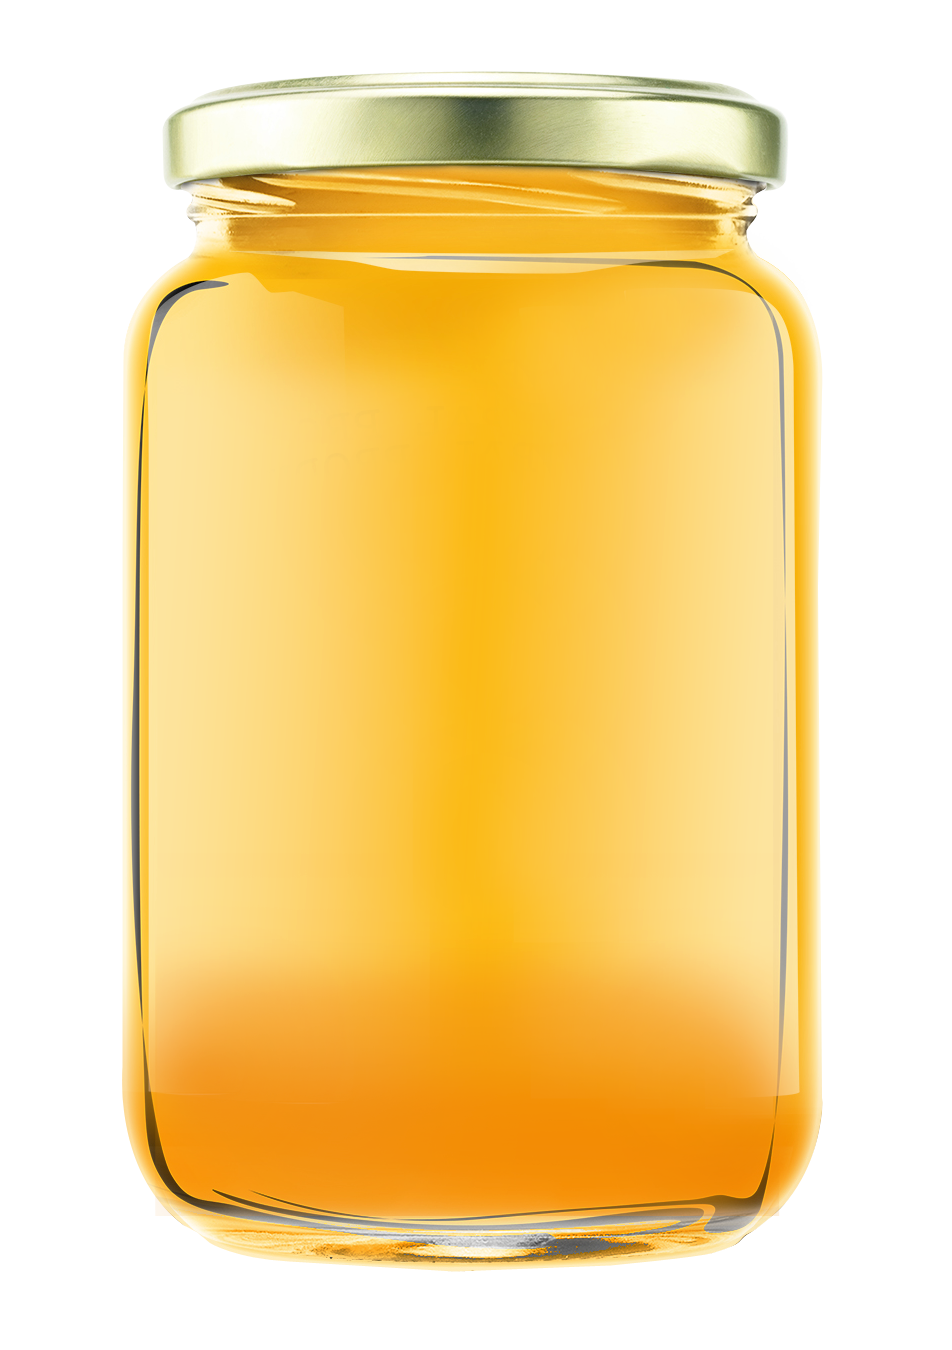 A Jar Of Honey With A Lid